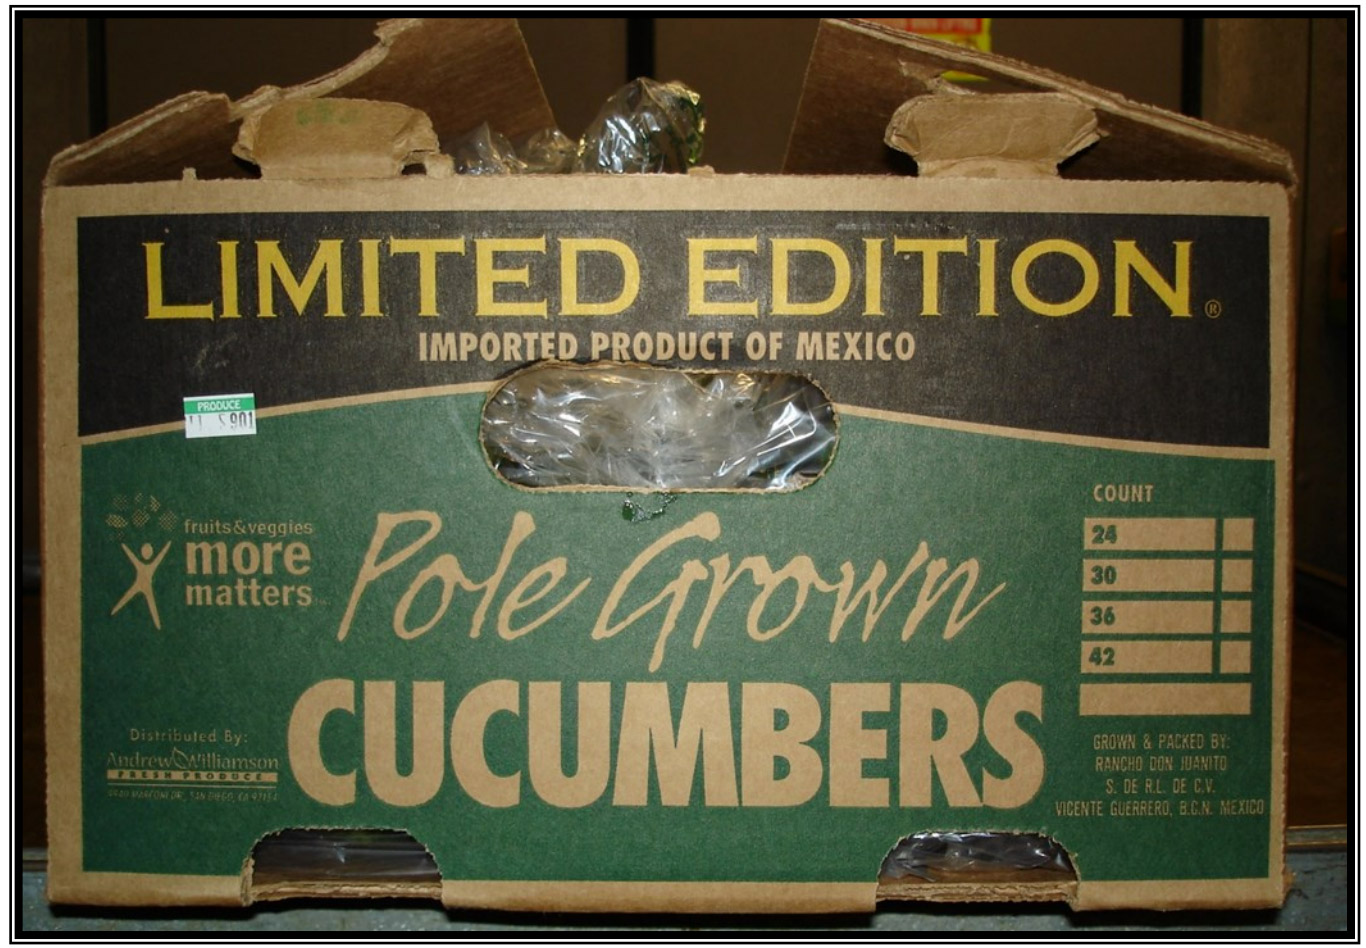 Salmonella Outbreak Potentially Linked To Andrew & Williamson Cucumbers